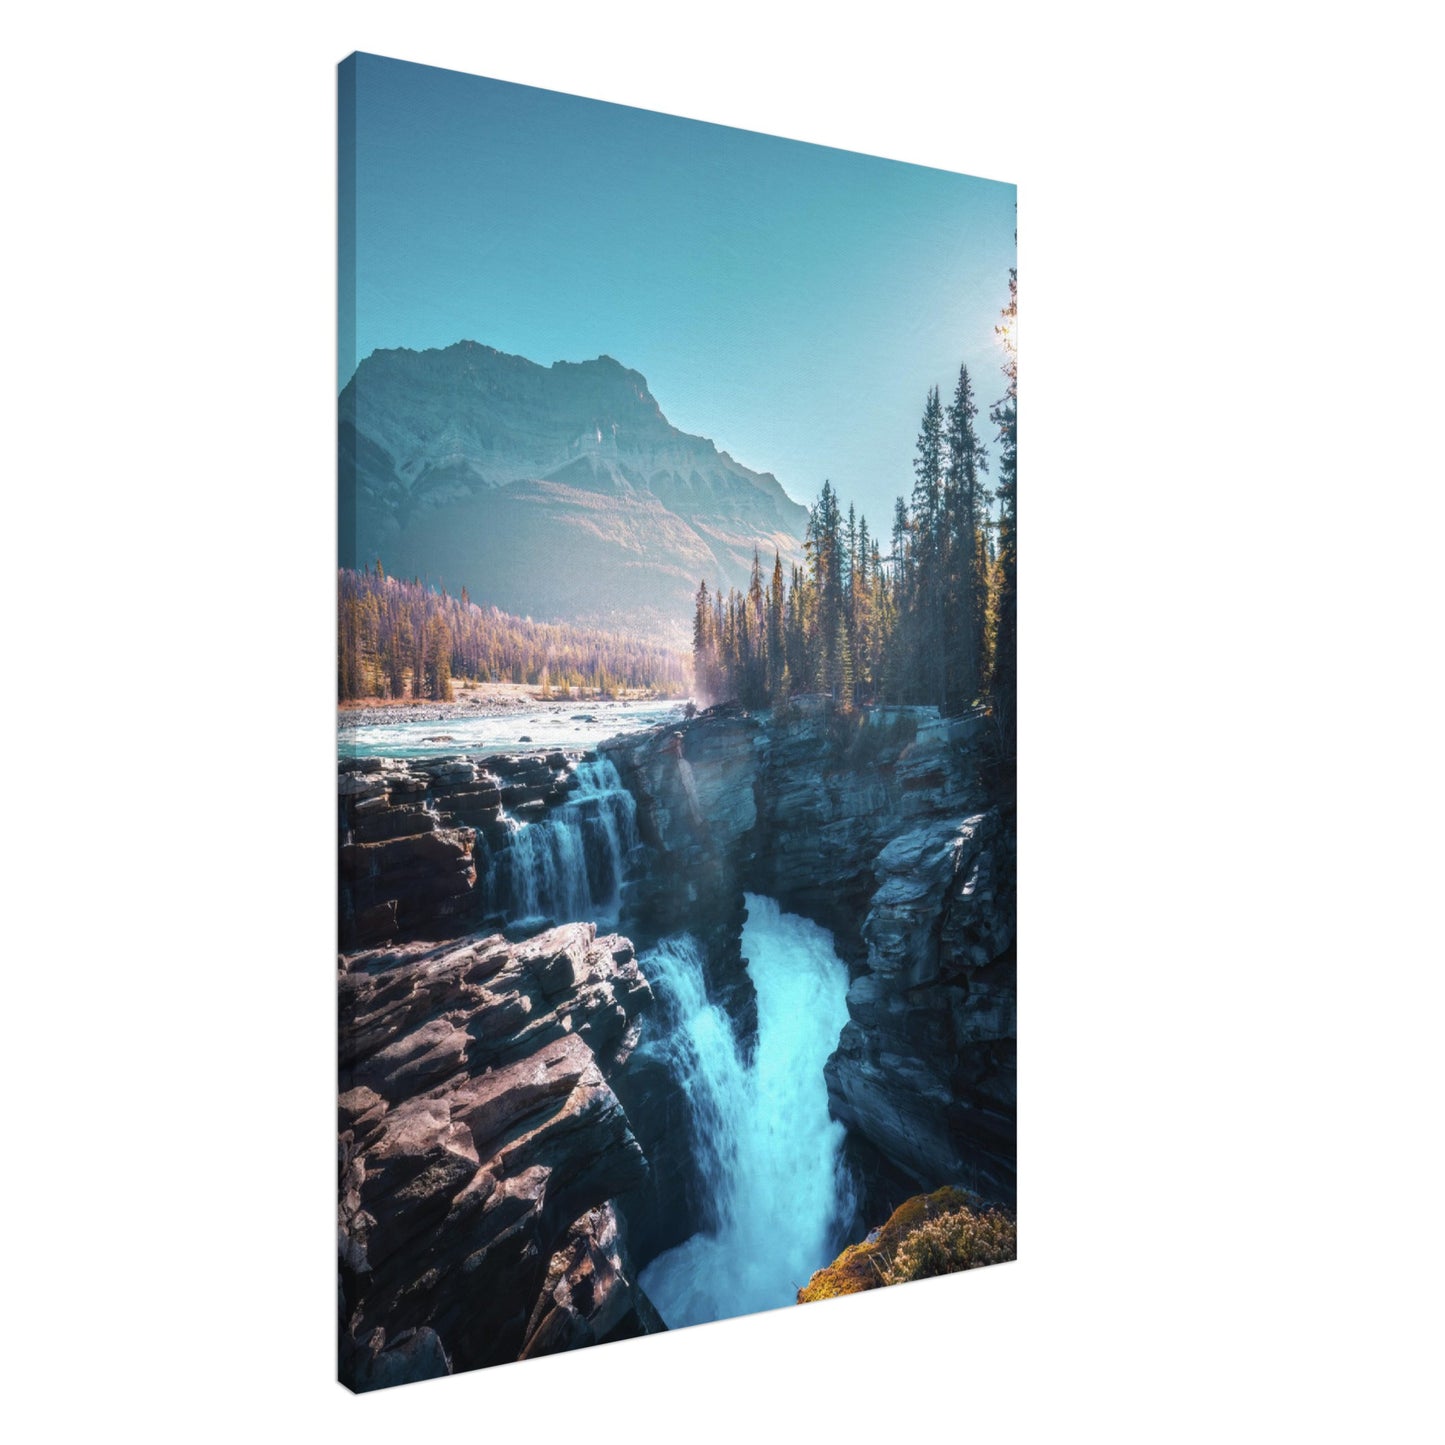 Don't Go chasing Waterfalls - Canvas